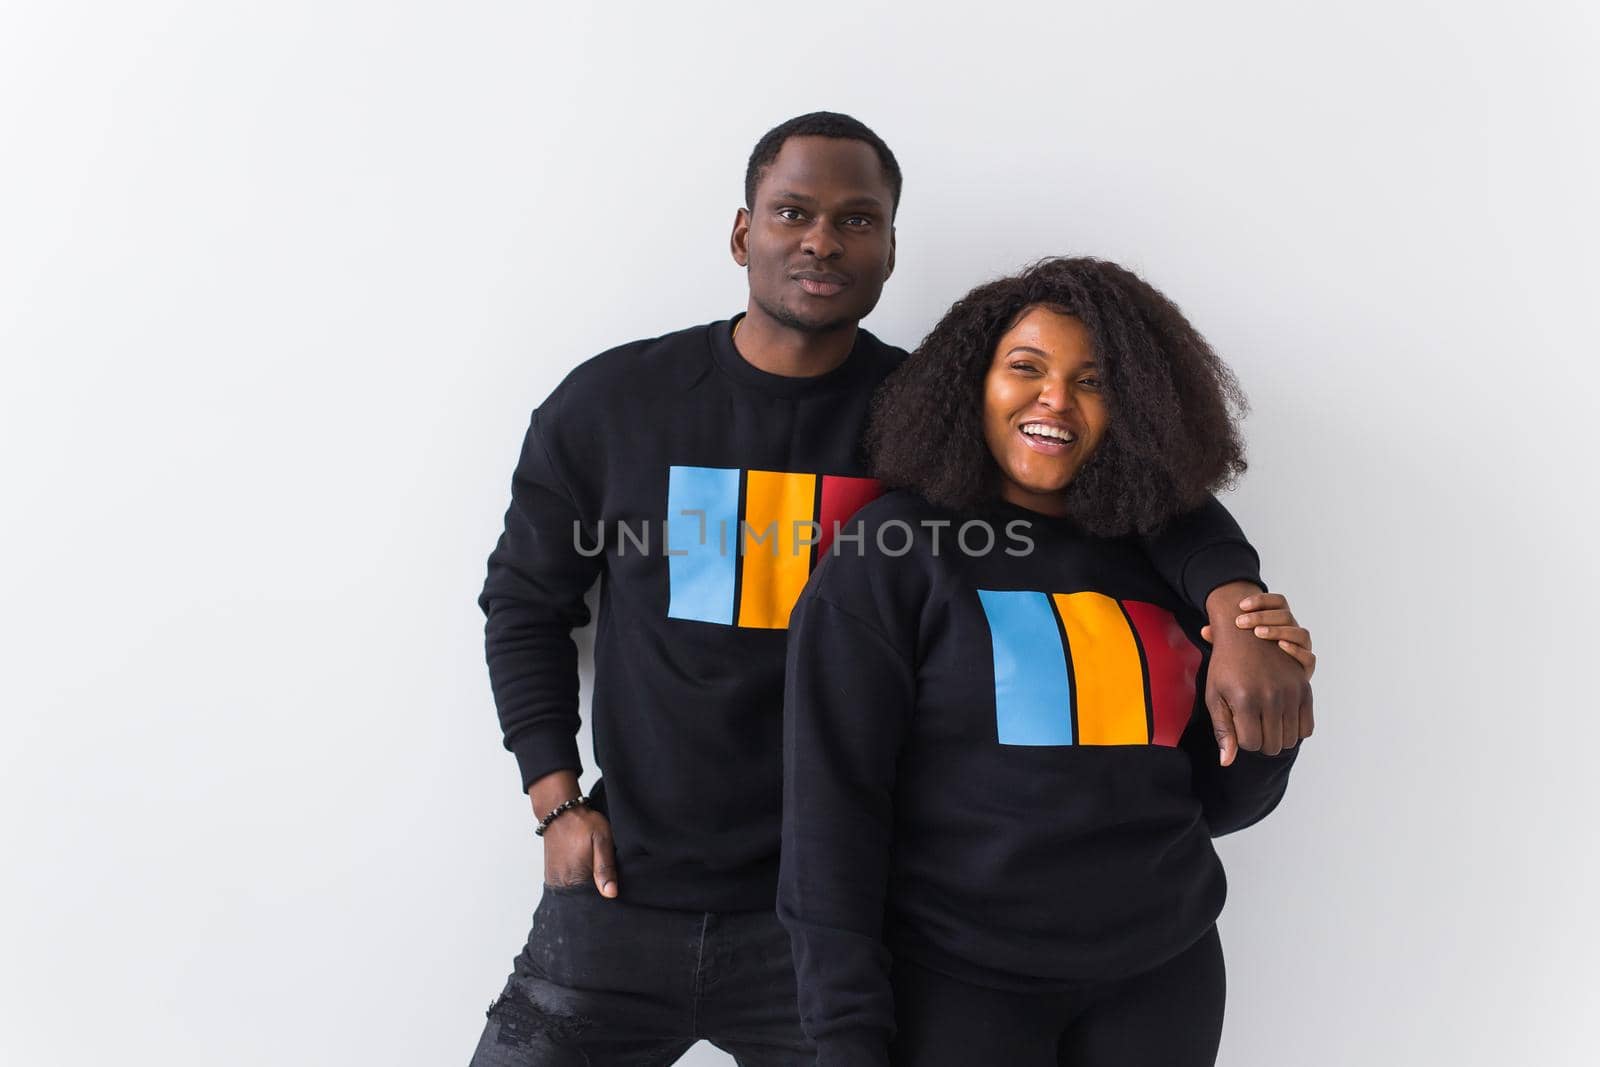 Happy African American woman and man have relationships, toothy smile, happy to meet with friends, dressed casually on white background. Emotions and friendship concept. by Satura86